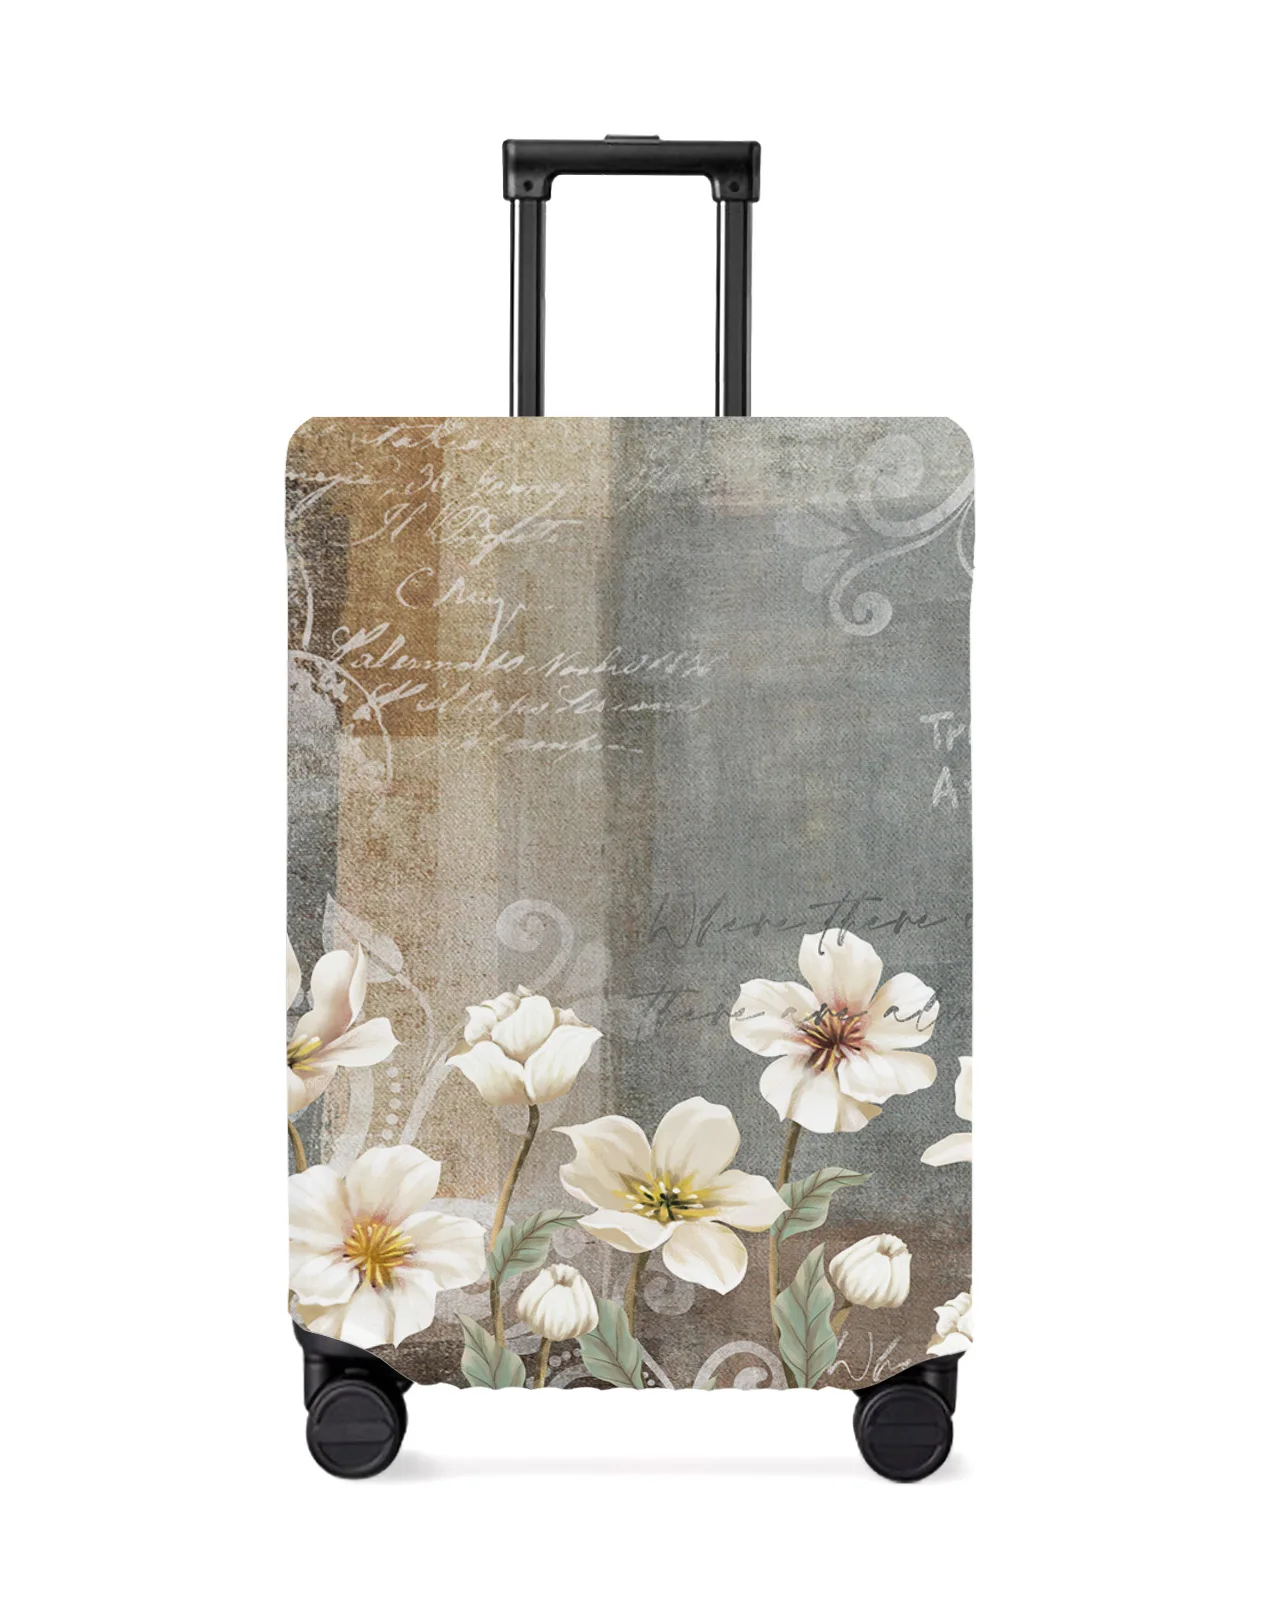 retro-plant-white-flower-abstract-travel-luggage-cover-elastic-baggage-cover-suitcase-case-dust-cover-travel-accessories